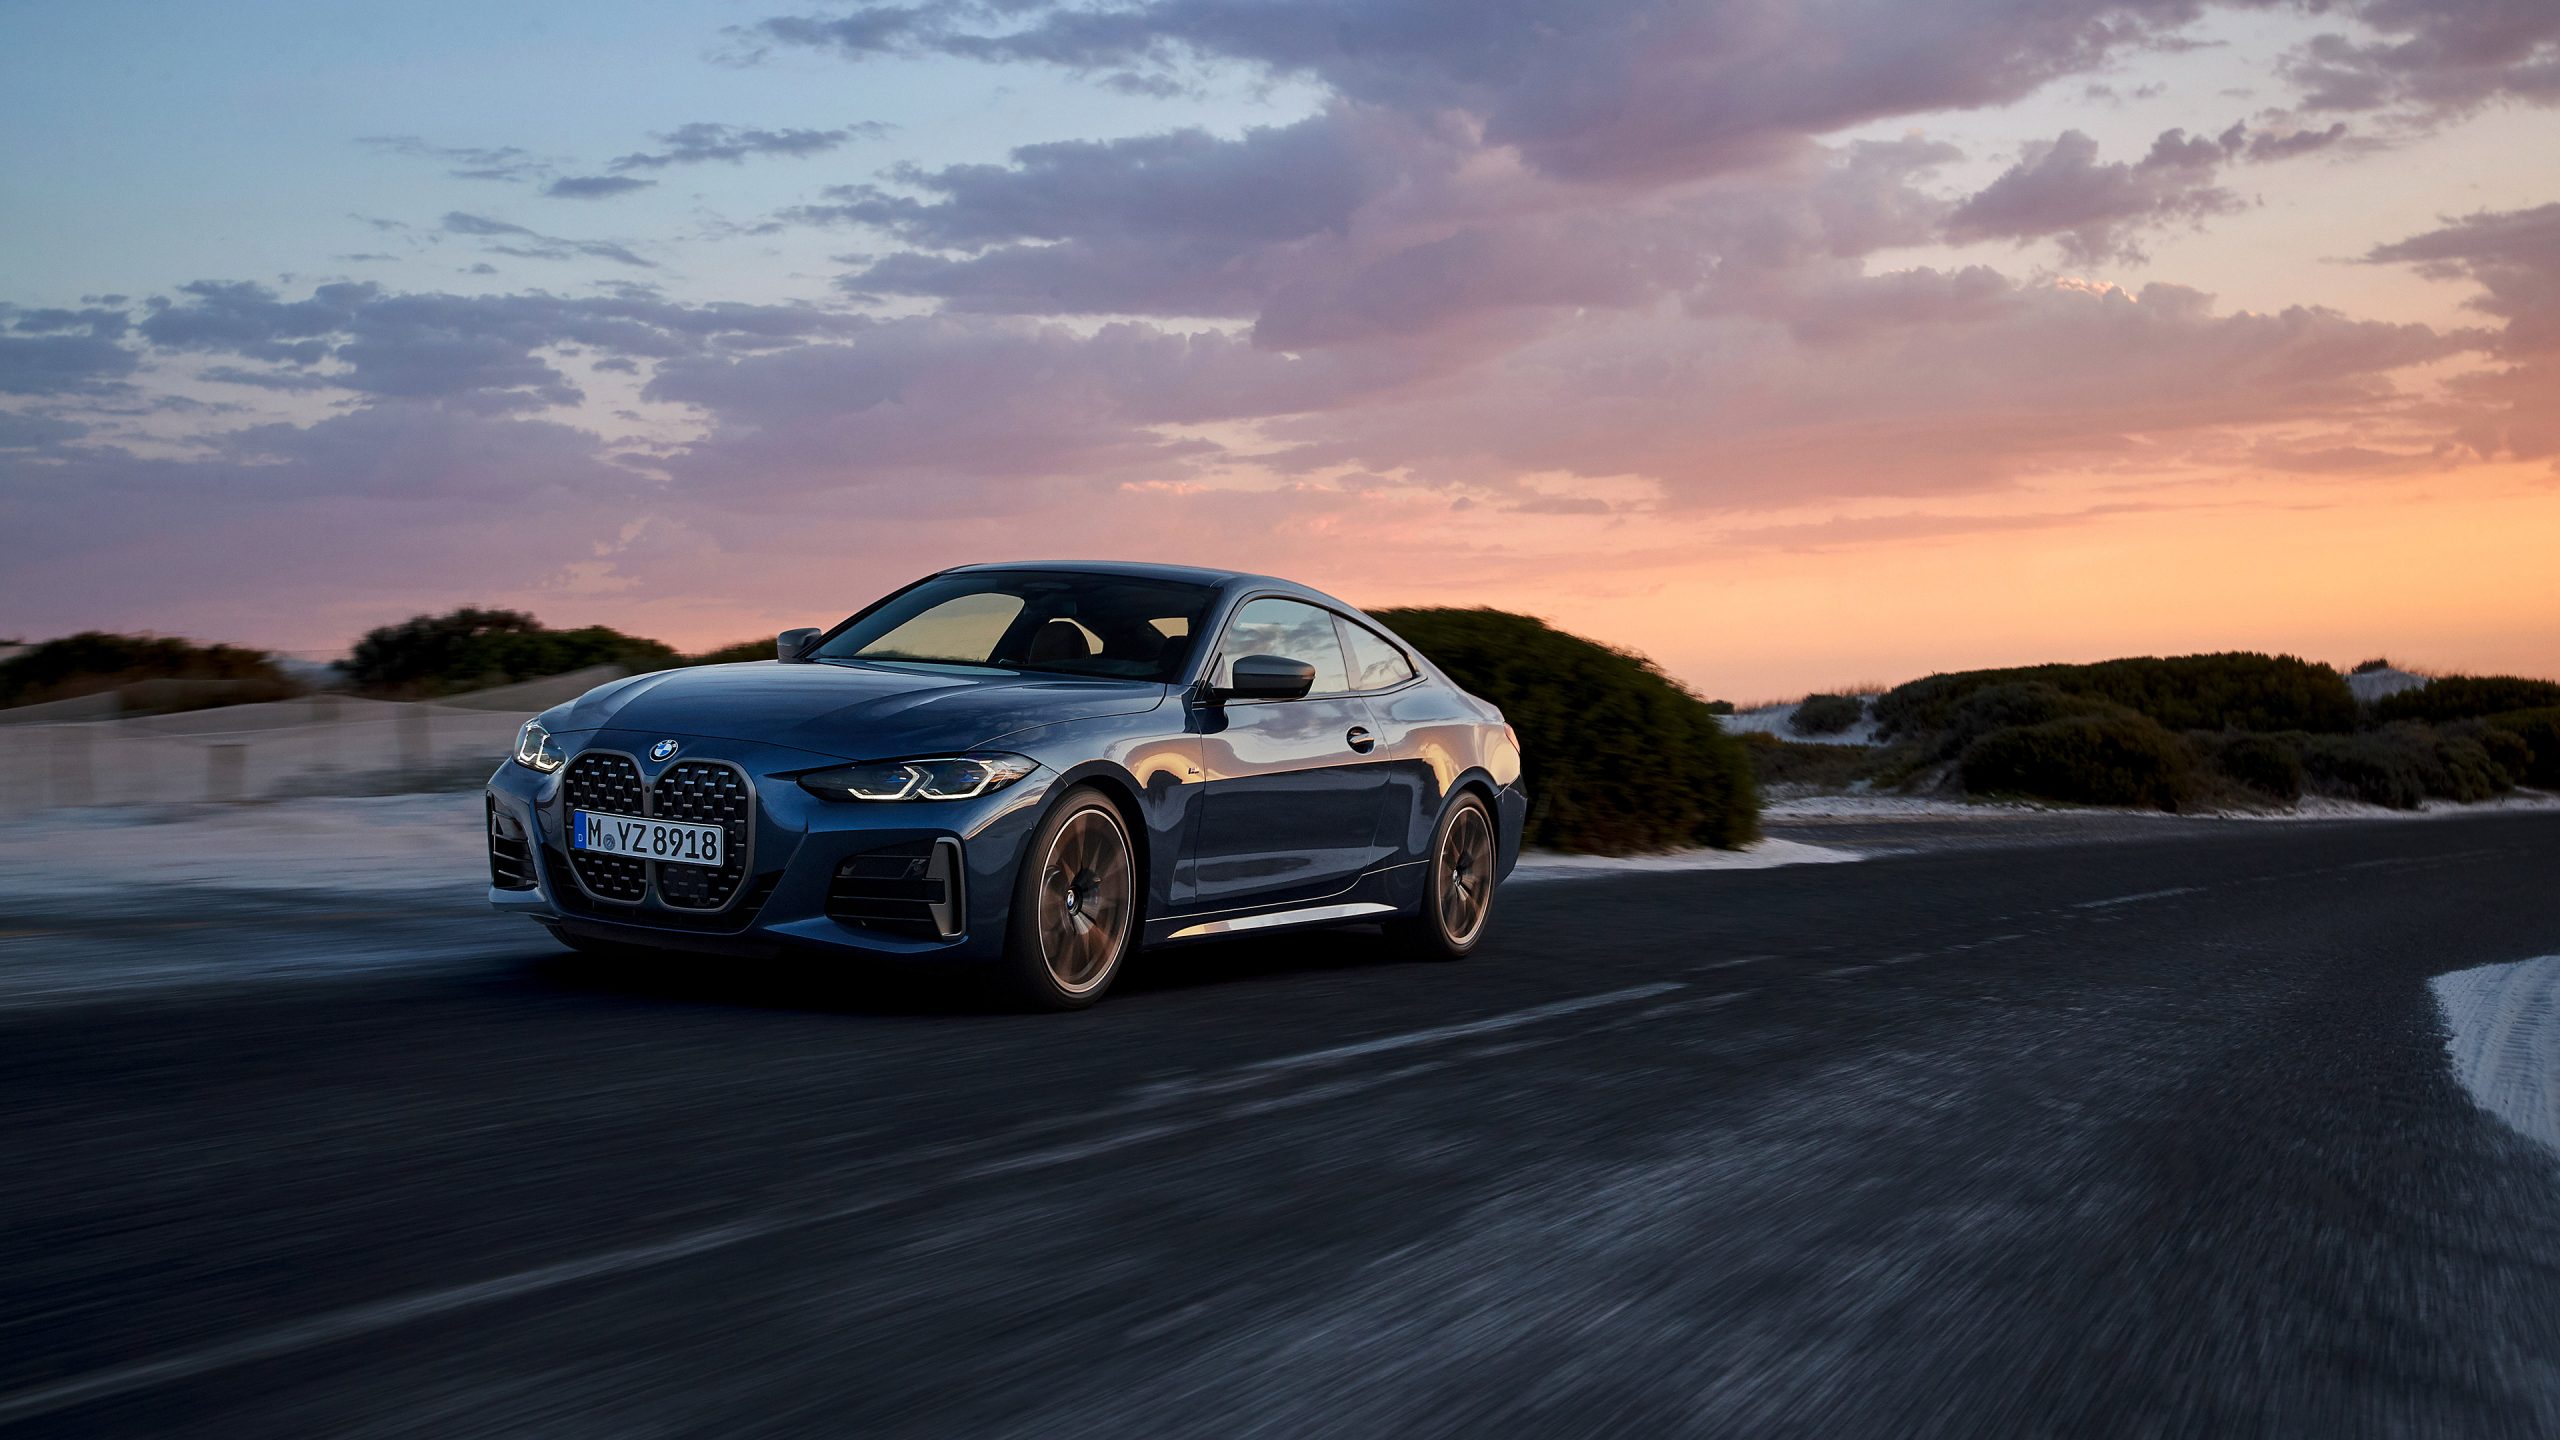 Bmw 4 Series Wallpapers